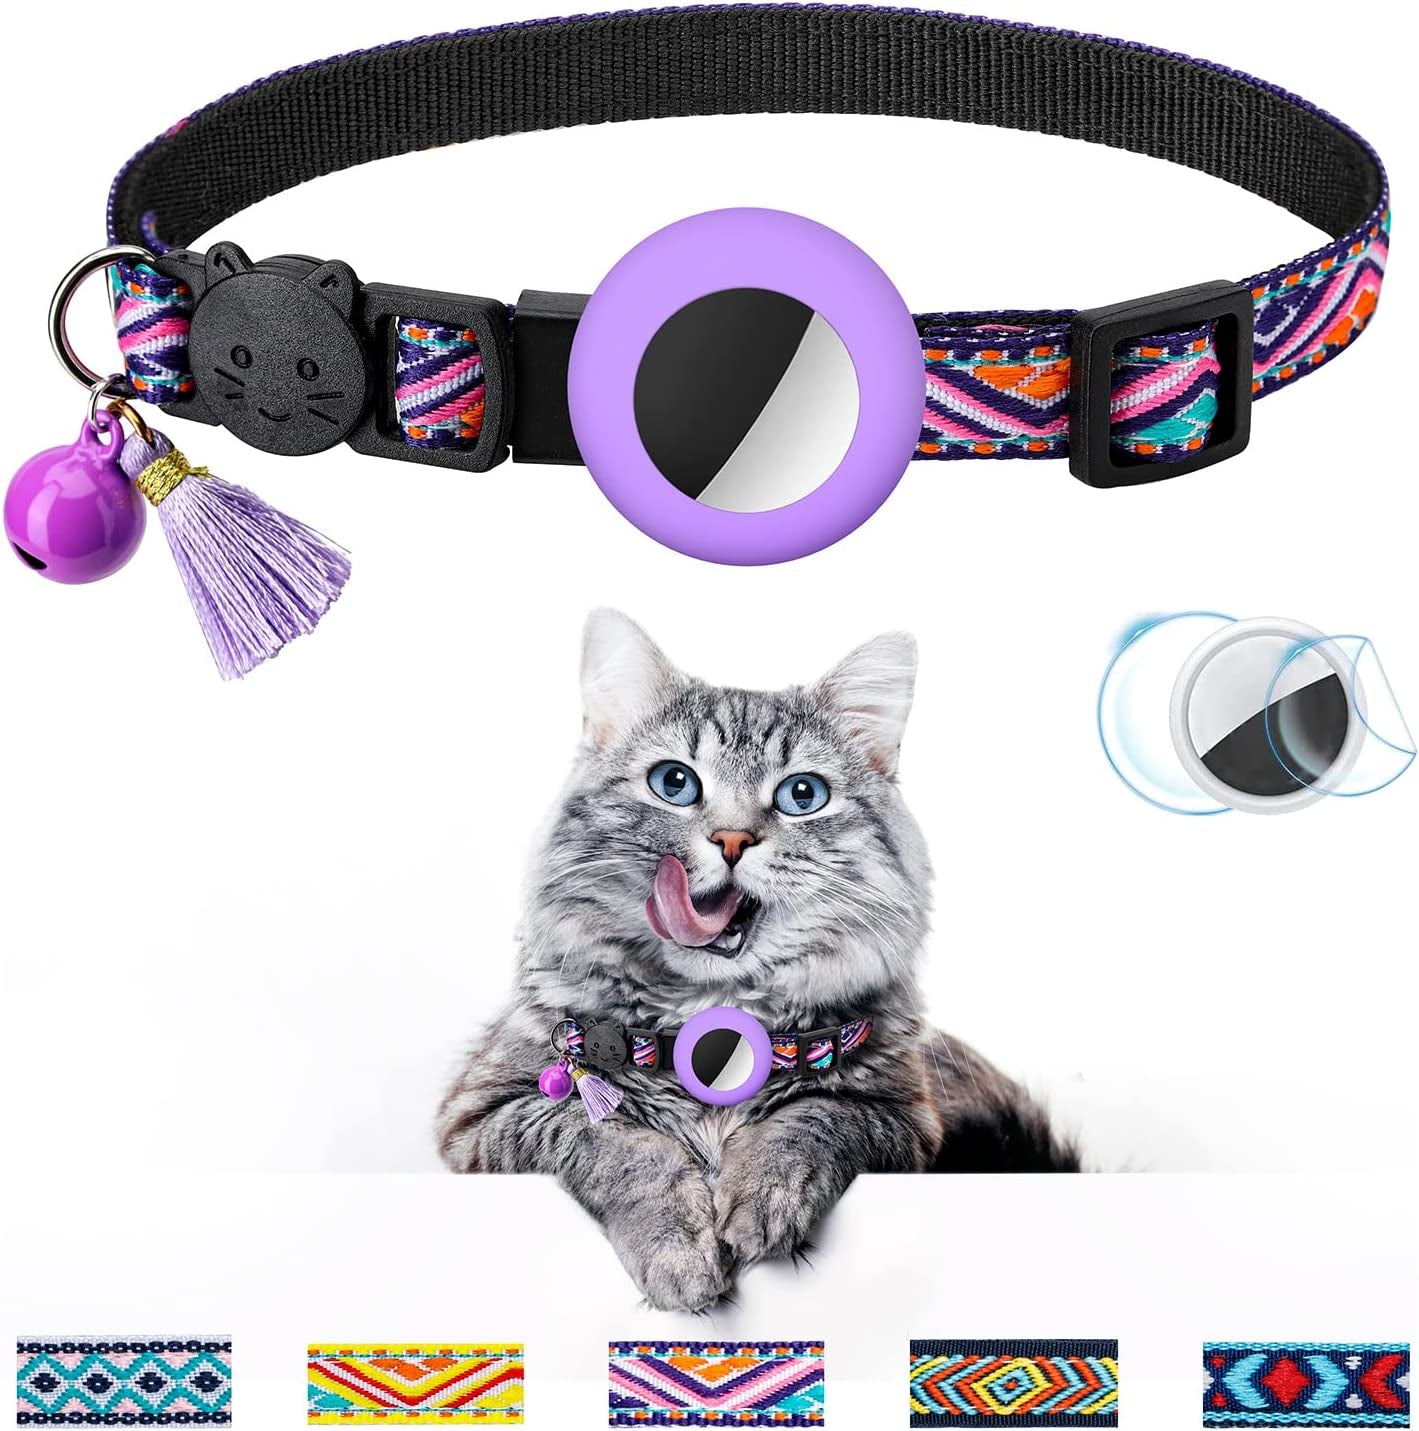 Airtag Cat Collar with Bell Adjustable Breakaway Kitten Collars:- Safety Buckle and Silicone Air Tag Holder Case Compatible with Apple Airtag Geometric Pattern Pet Collar